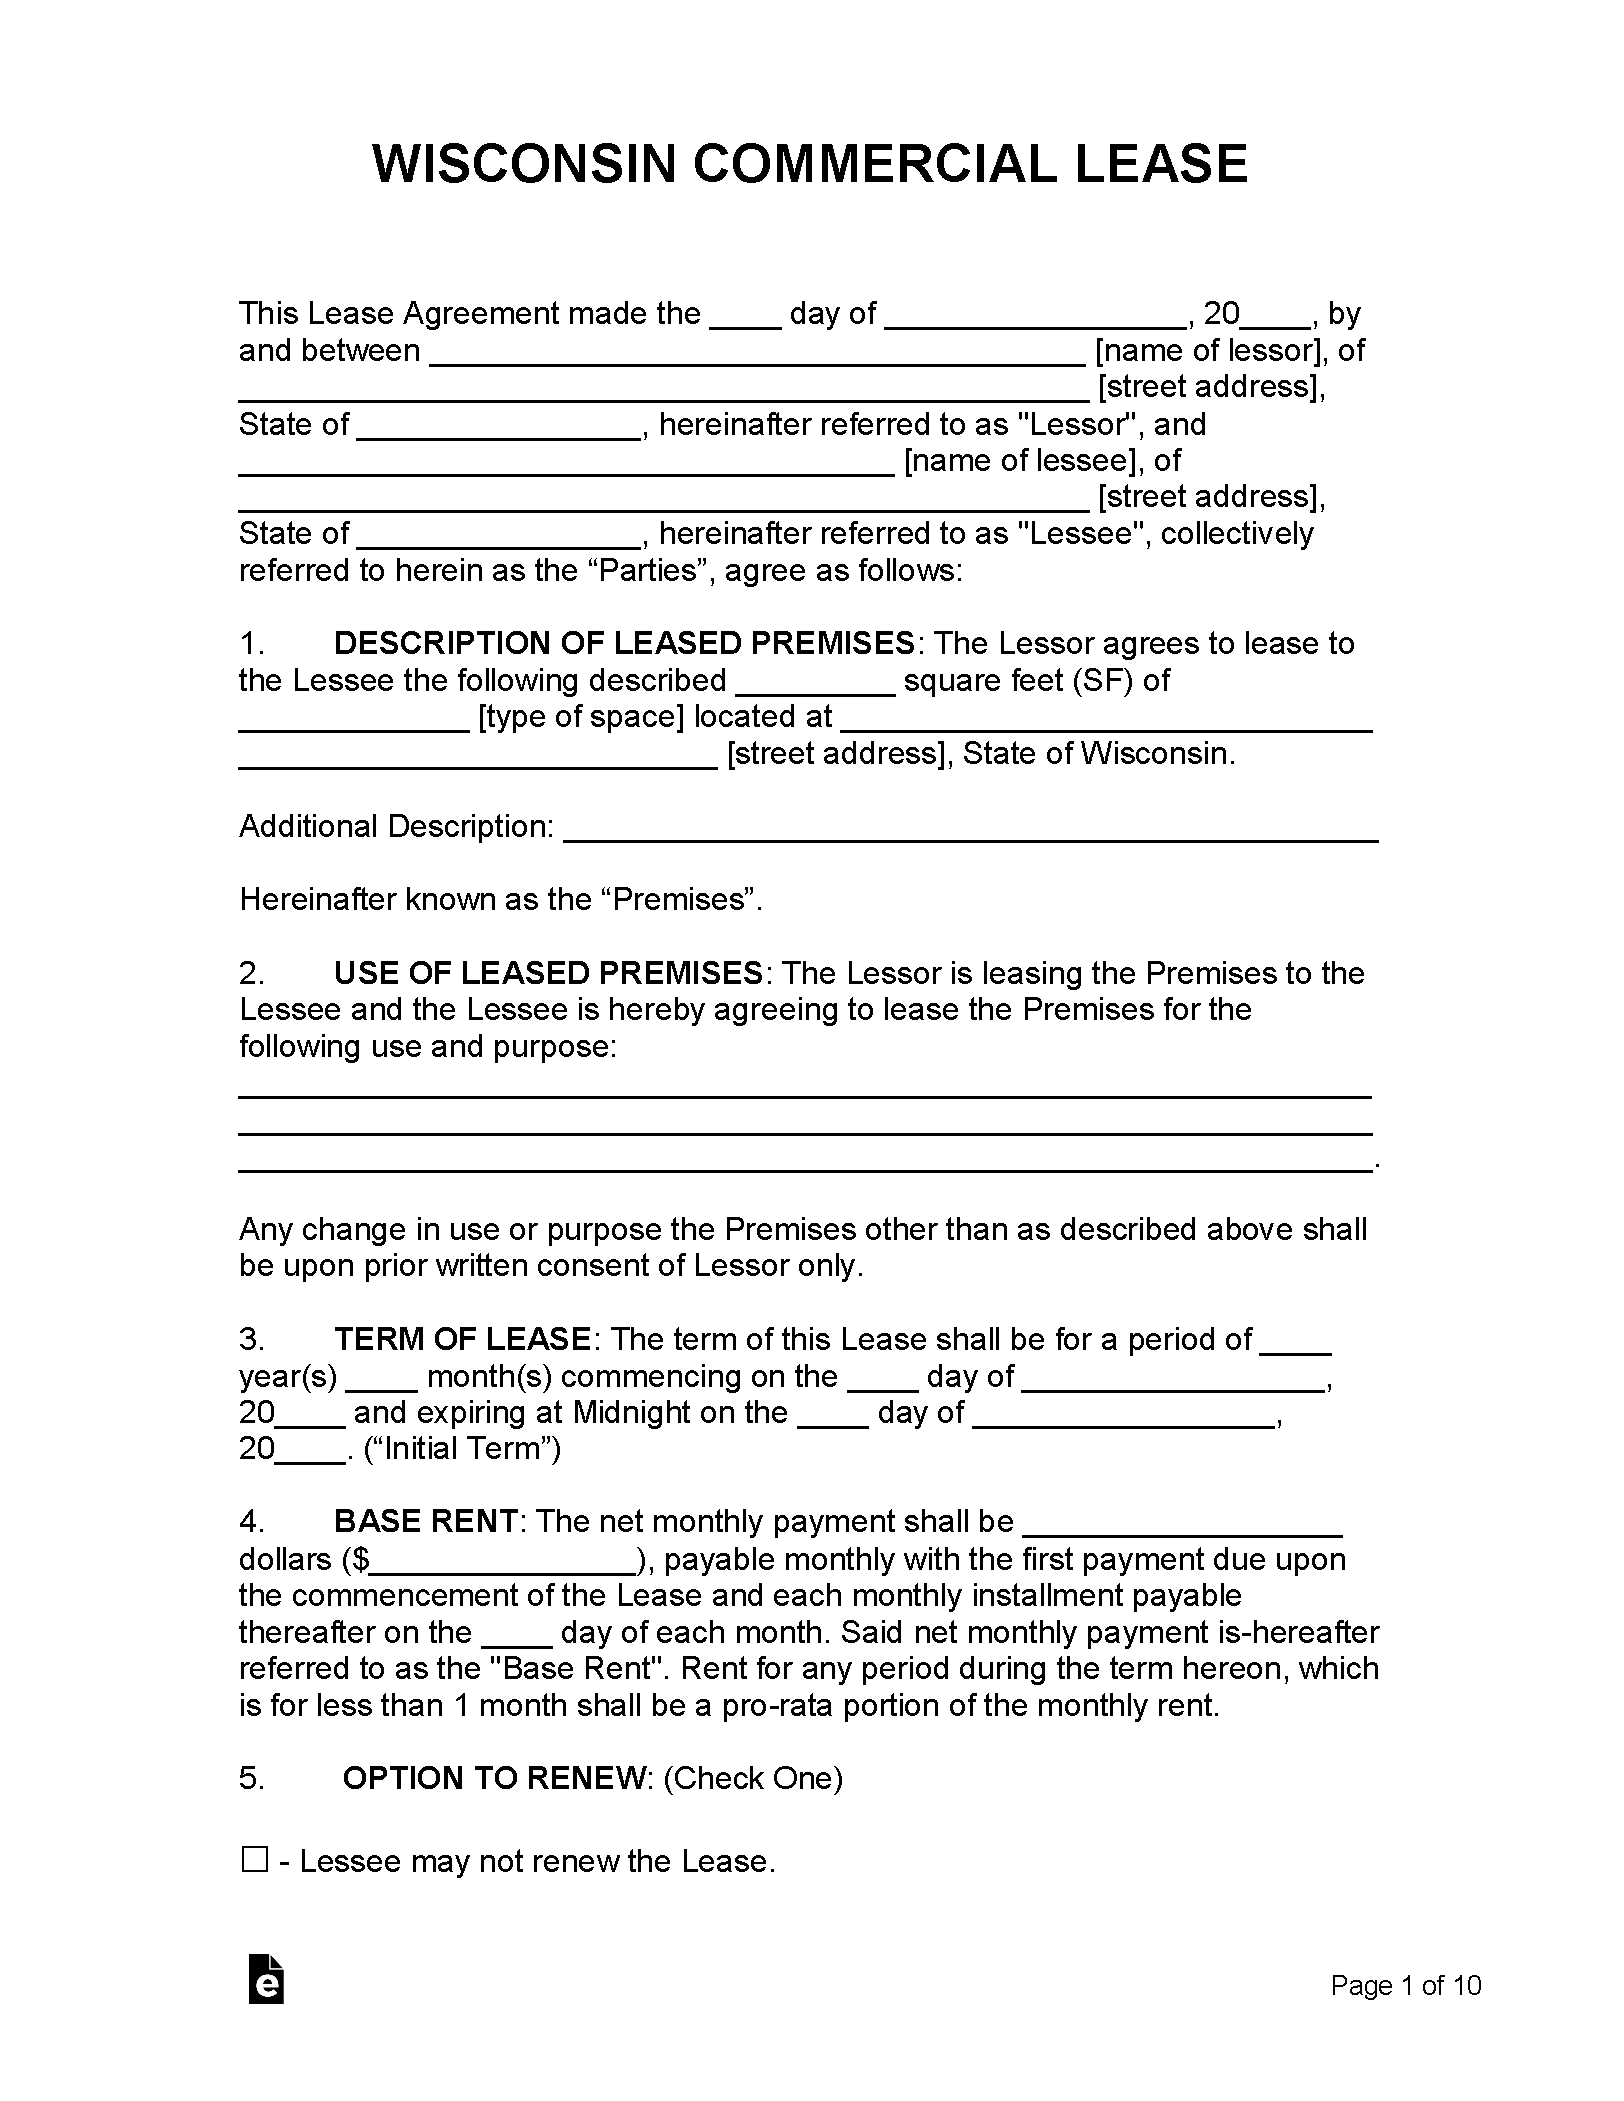 wisconsin-rental-agreement-custom-free-printable-forms-printable-forms-free-online